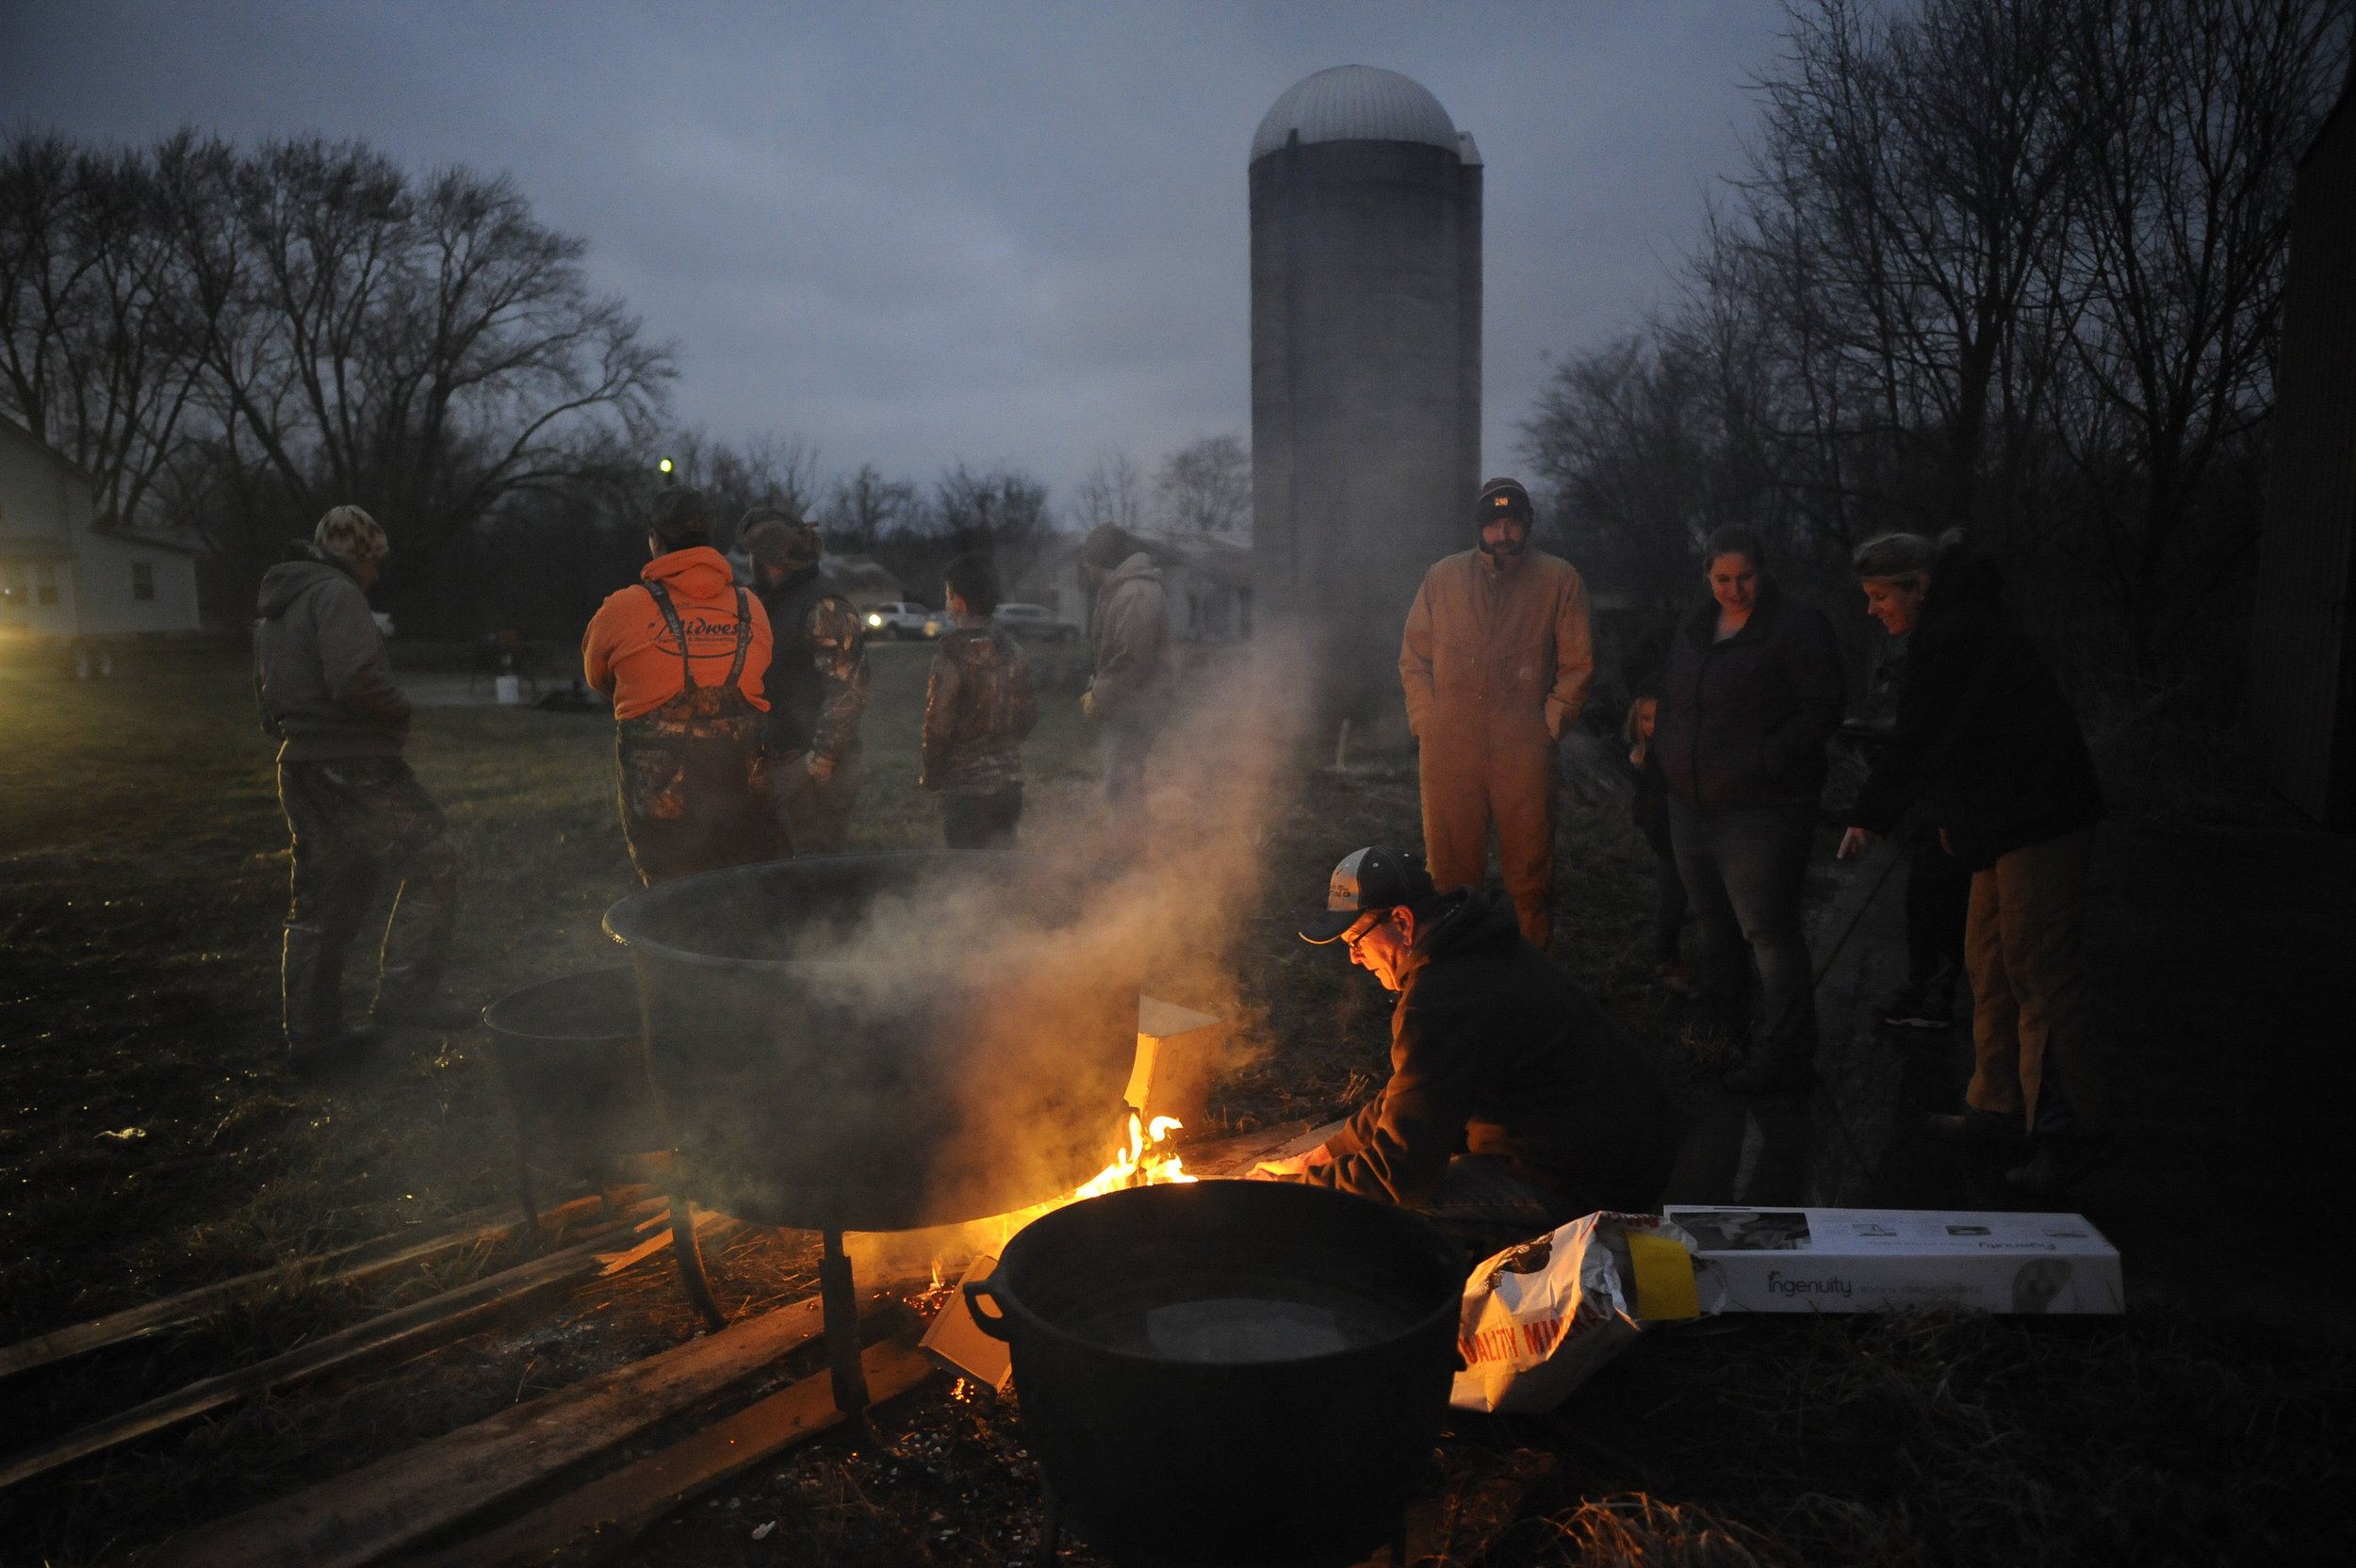  The oldest boy of Rueben Hotop's 13 children, Ronnie Hotop of Perryville, Missouri, lights a fire under a cooking pot shortly prior to 7 a.m. before the start of hog butchering. For the Hotop family, hog butchering is a decades-old tradition passed 